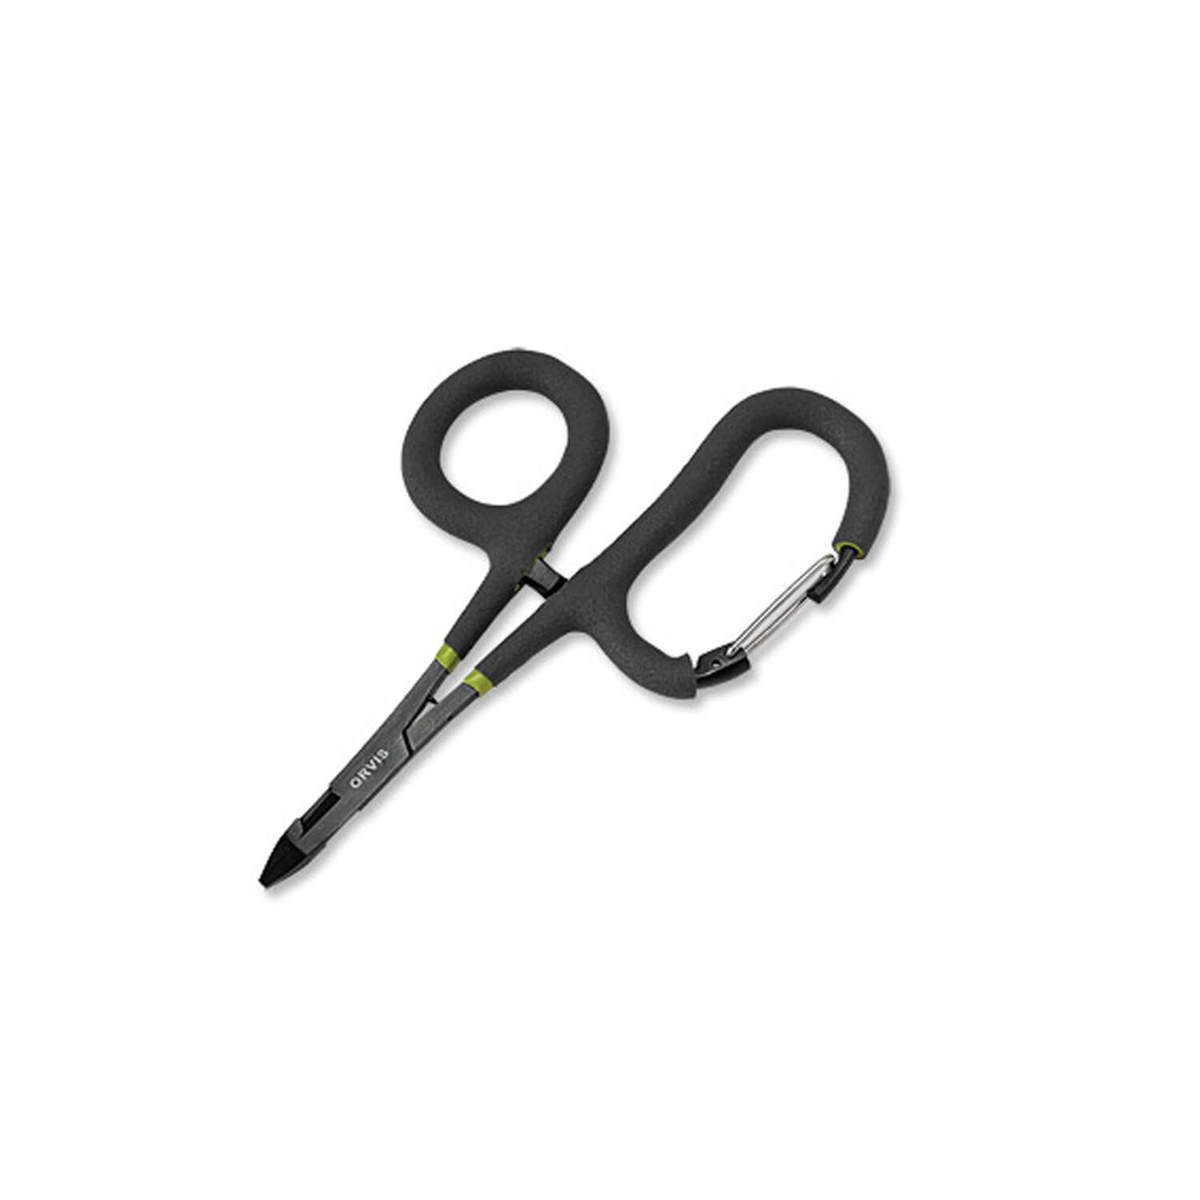 Quickdraw Forceps